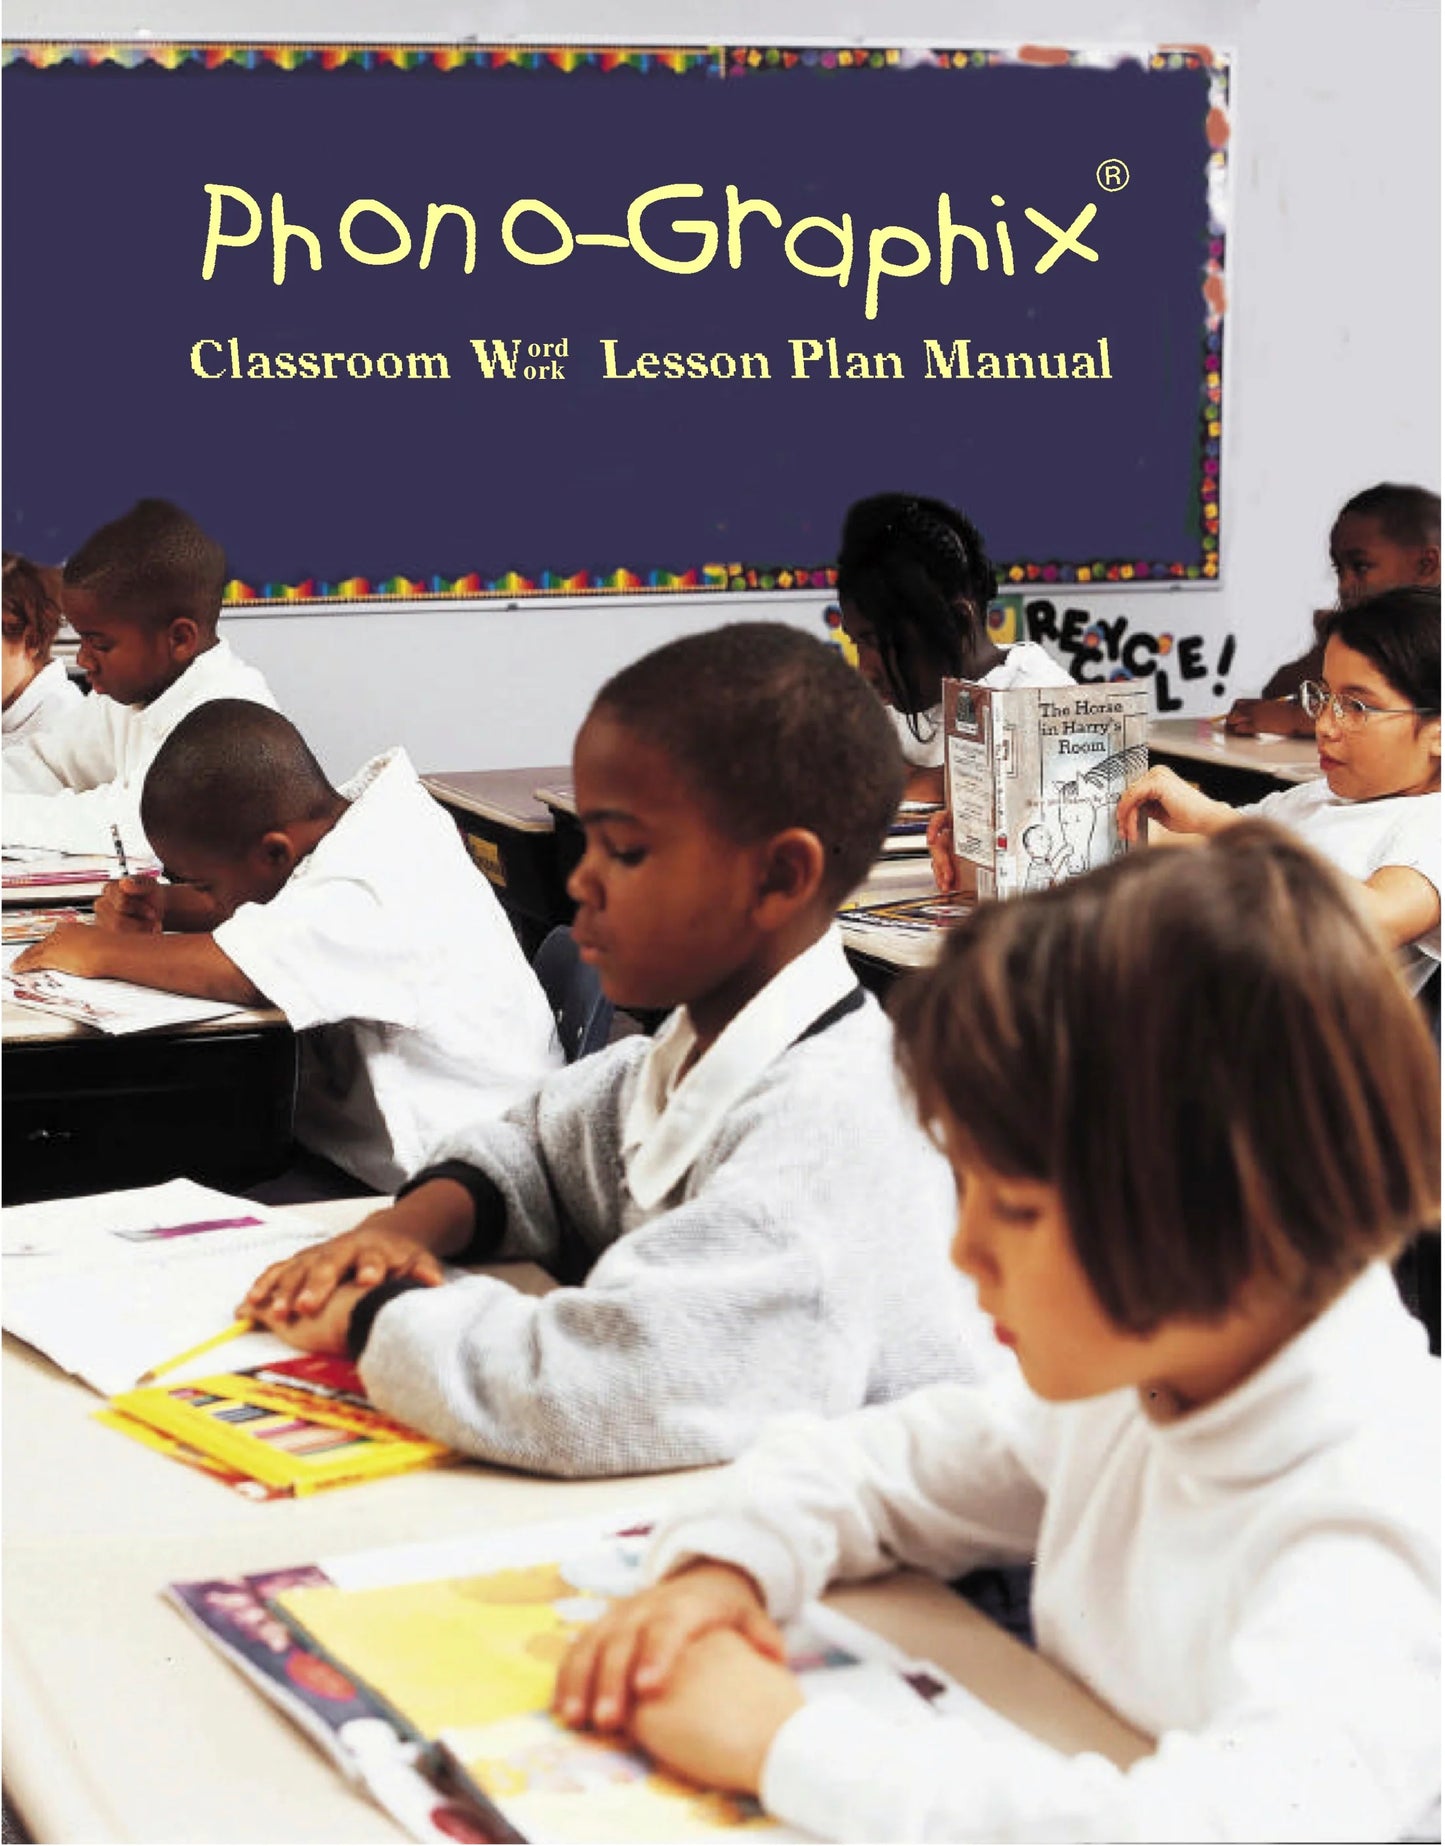 Self-paced Online Phono-Graphix Certification Course